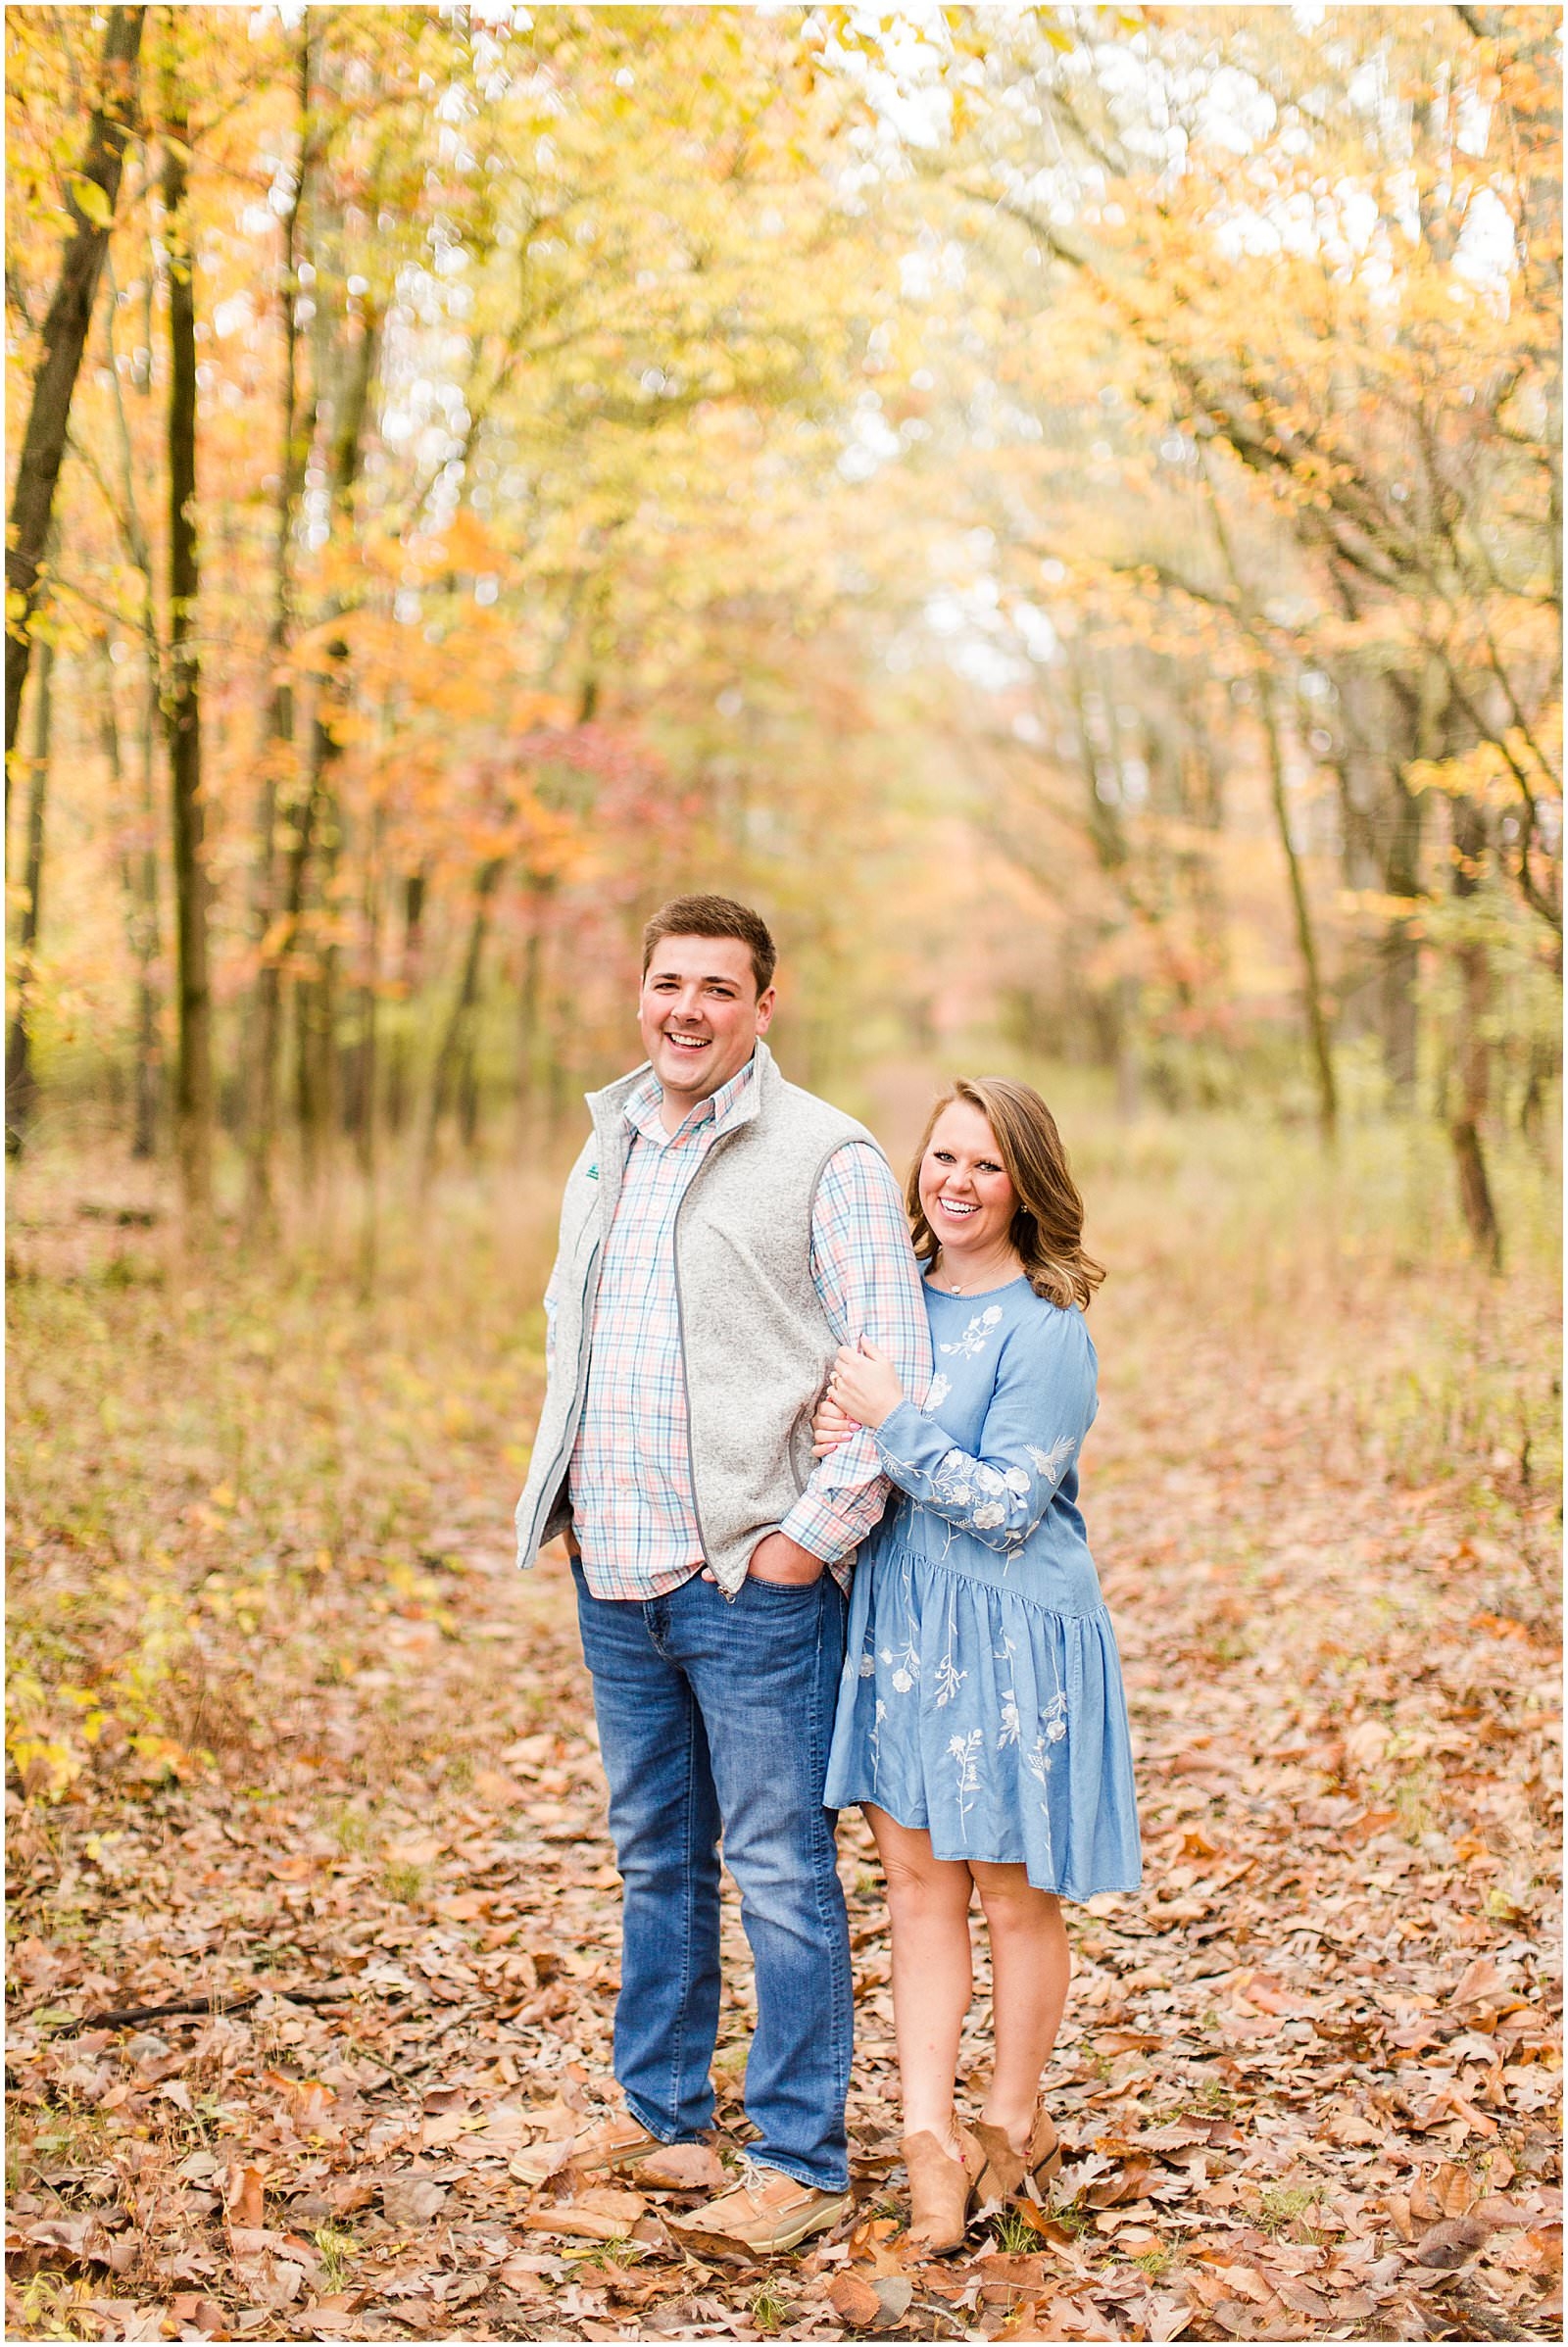 A Southern Illinois Engagement Session | Roxanne and Matthew | Bret and Brandie Photography 0040.jpg